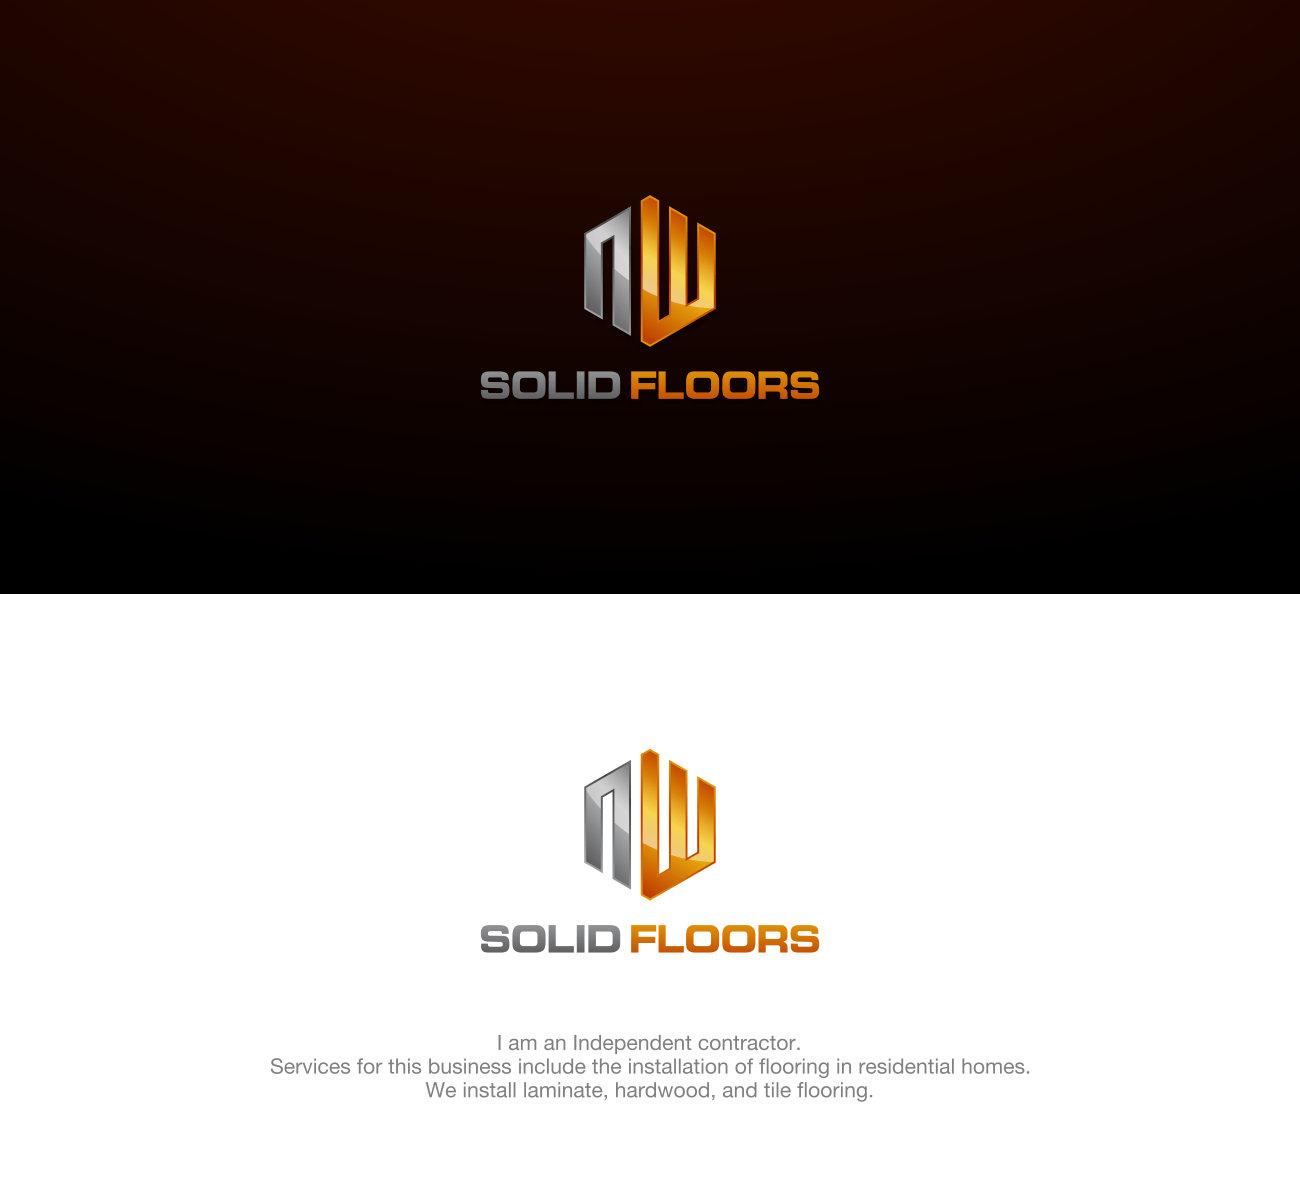 NW Logo - 46 Modern Logo Designs | Flooring Logo Design Project for NW Solid ...